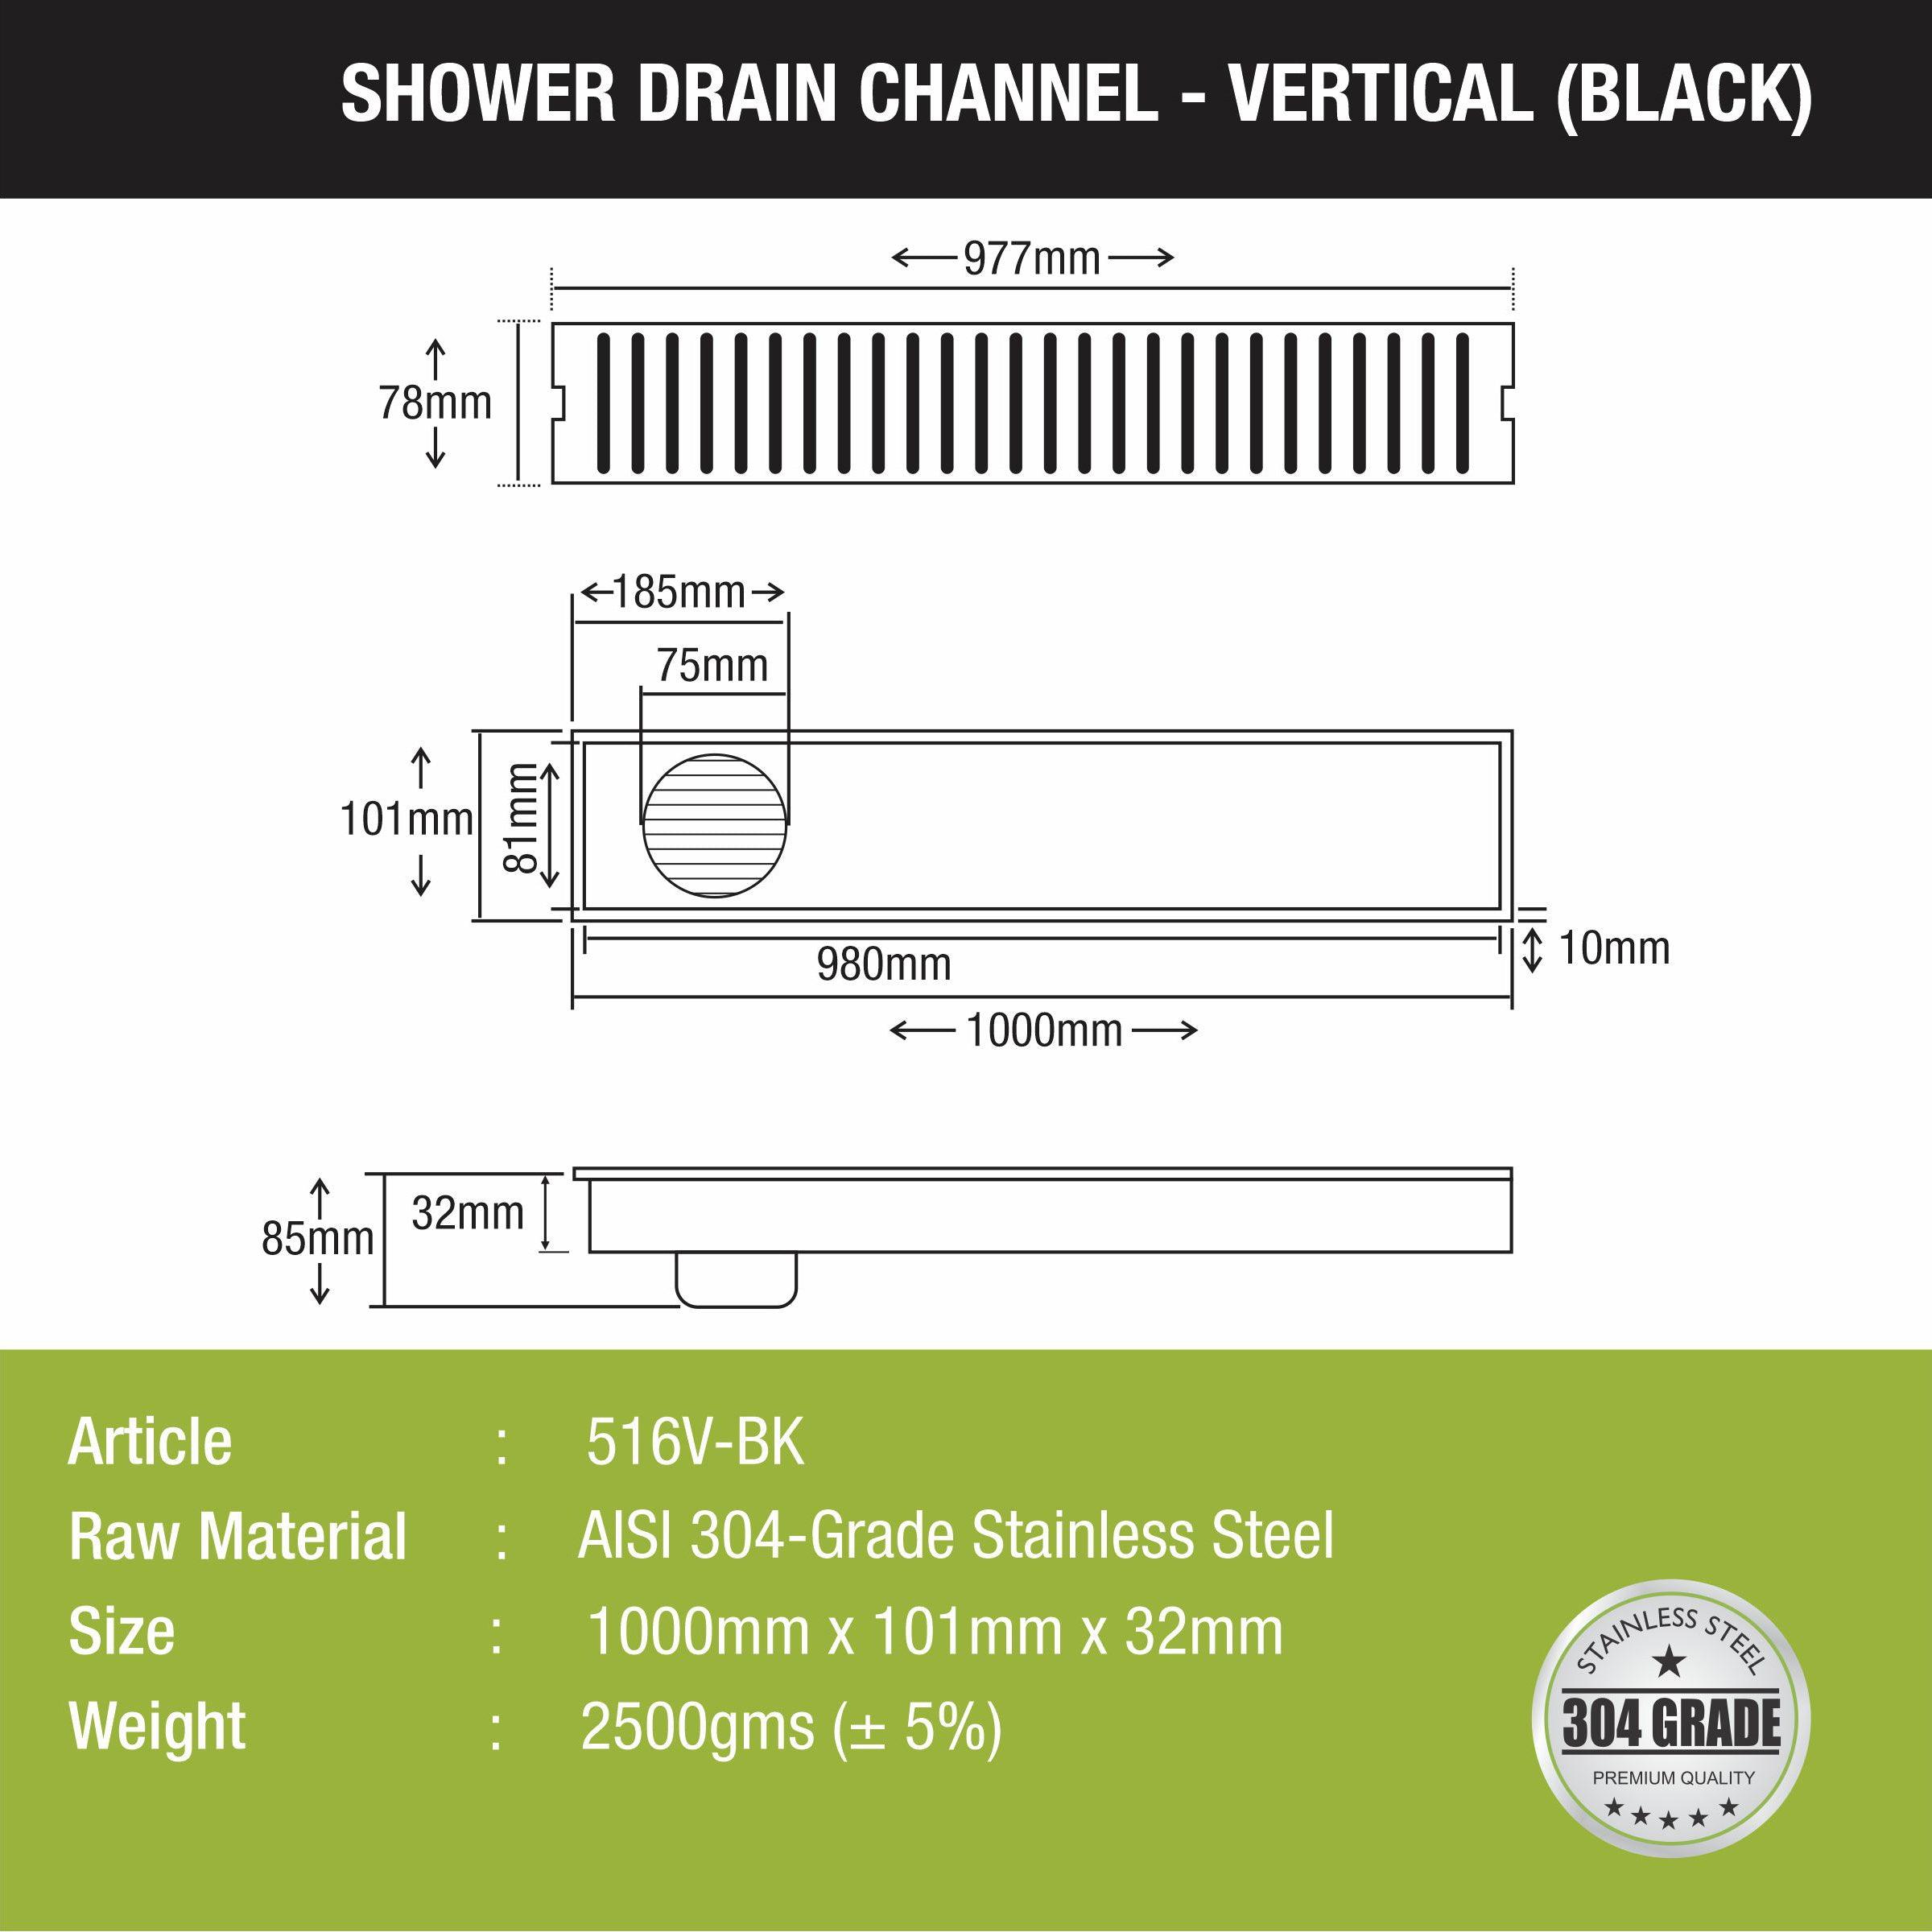 Vertical Shower Drain Channel - Black (40 x 4 Inches) size and measurement